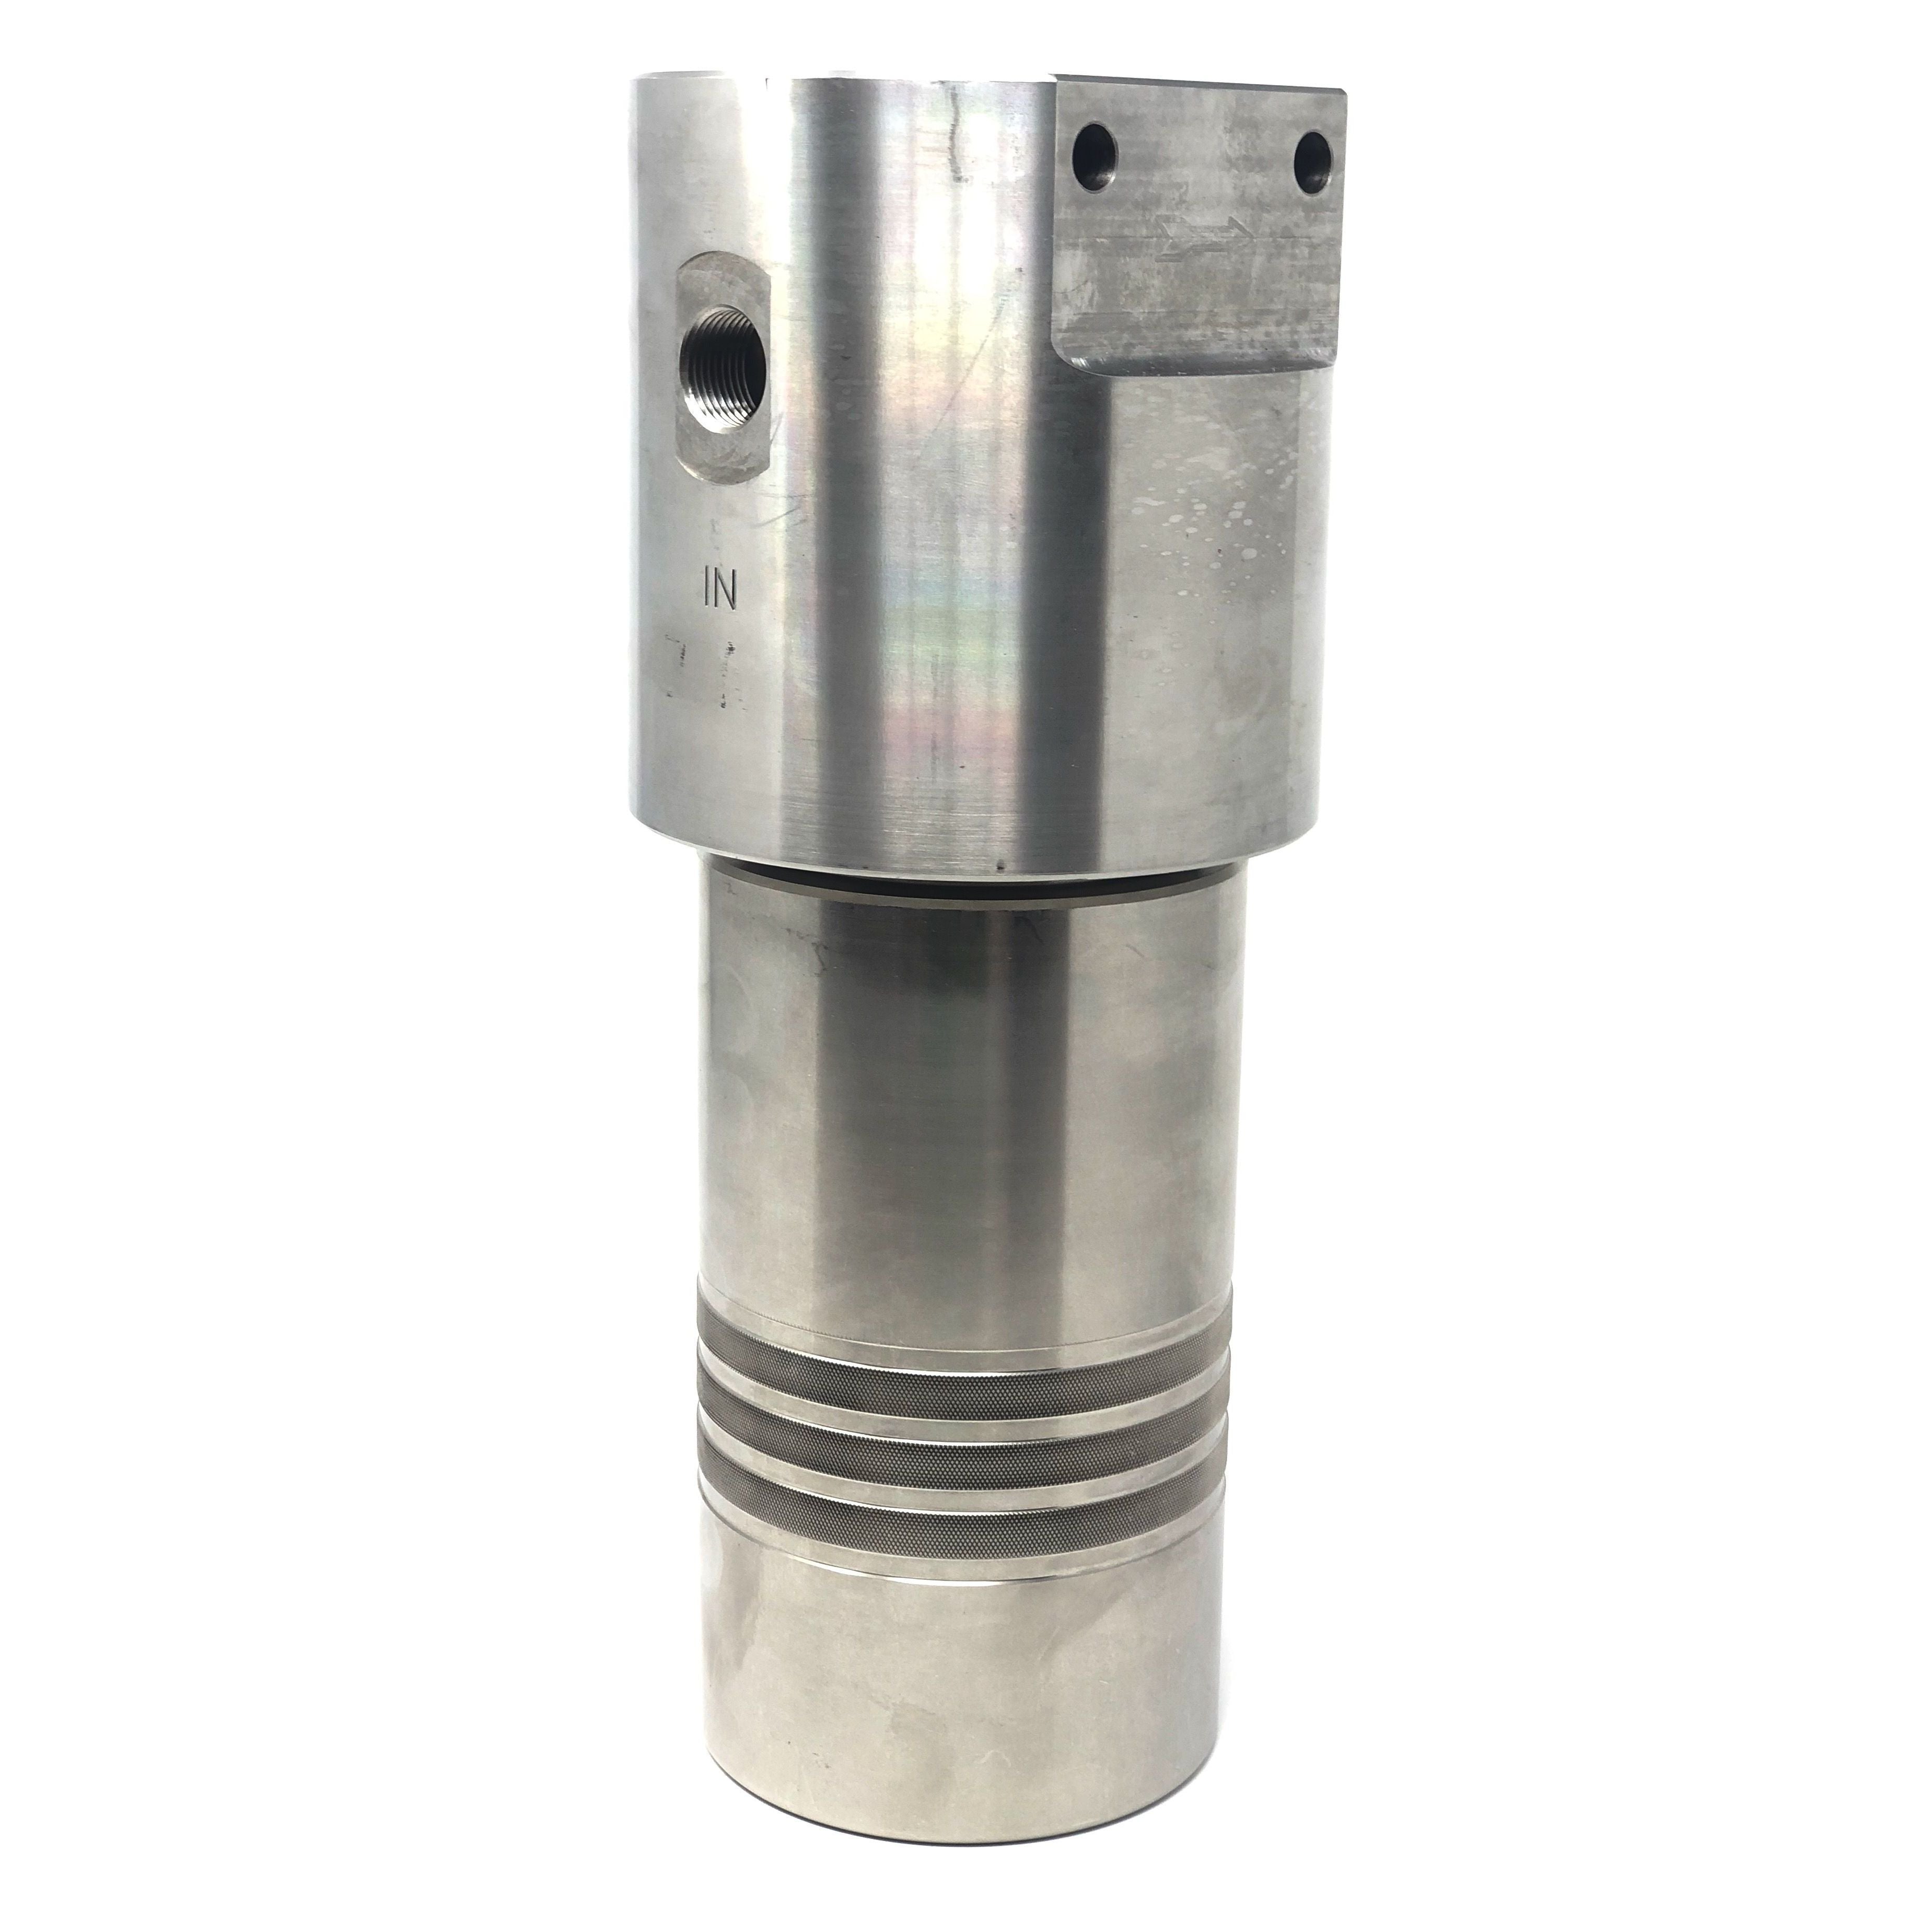 52S-248S-25SEN : Chase Ultra High Pressure Inline Filter, 10000psi, #8 SAE (1/2"), 25 Micron, With Visual Indicator, No Bypass